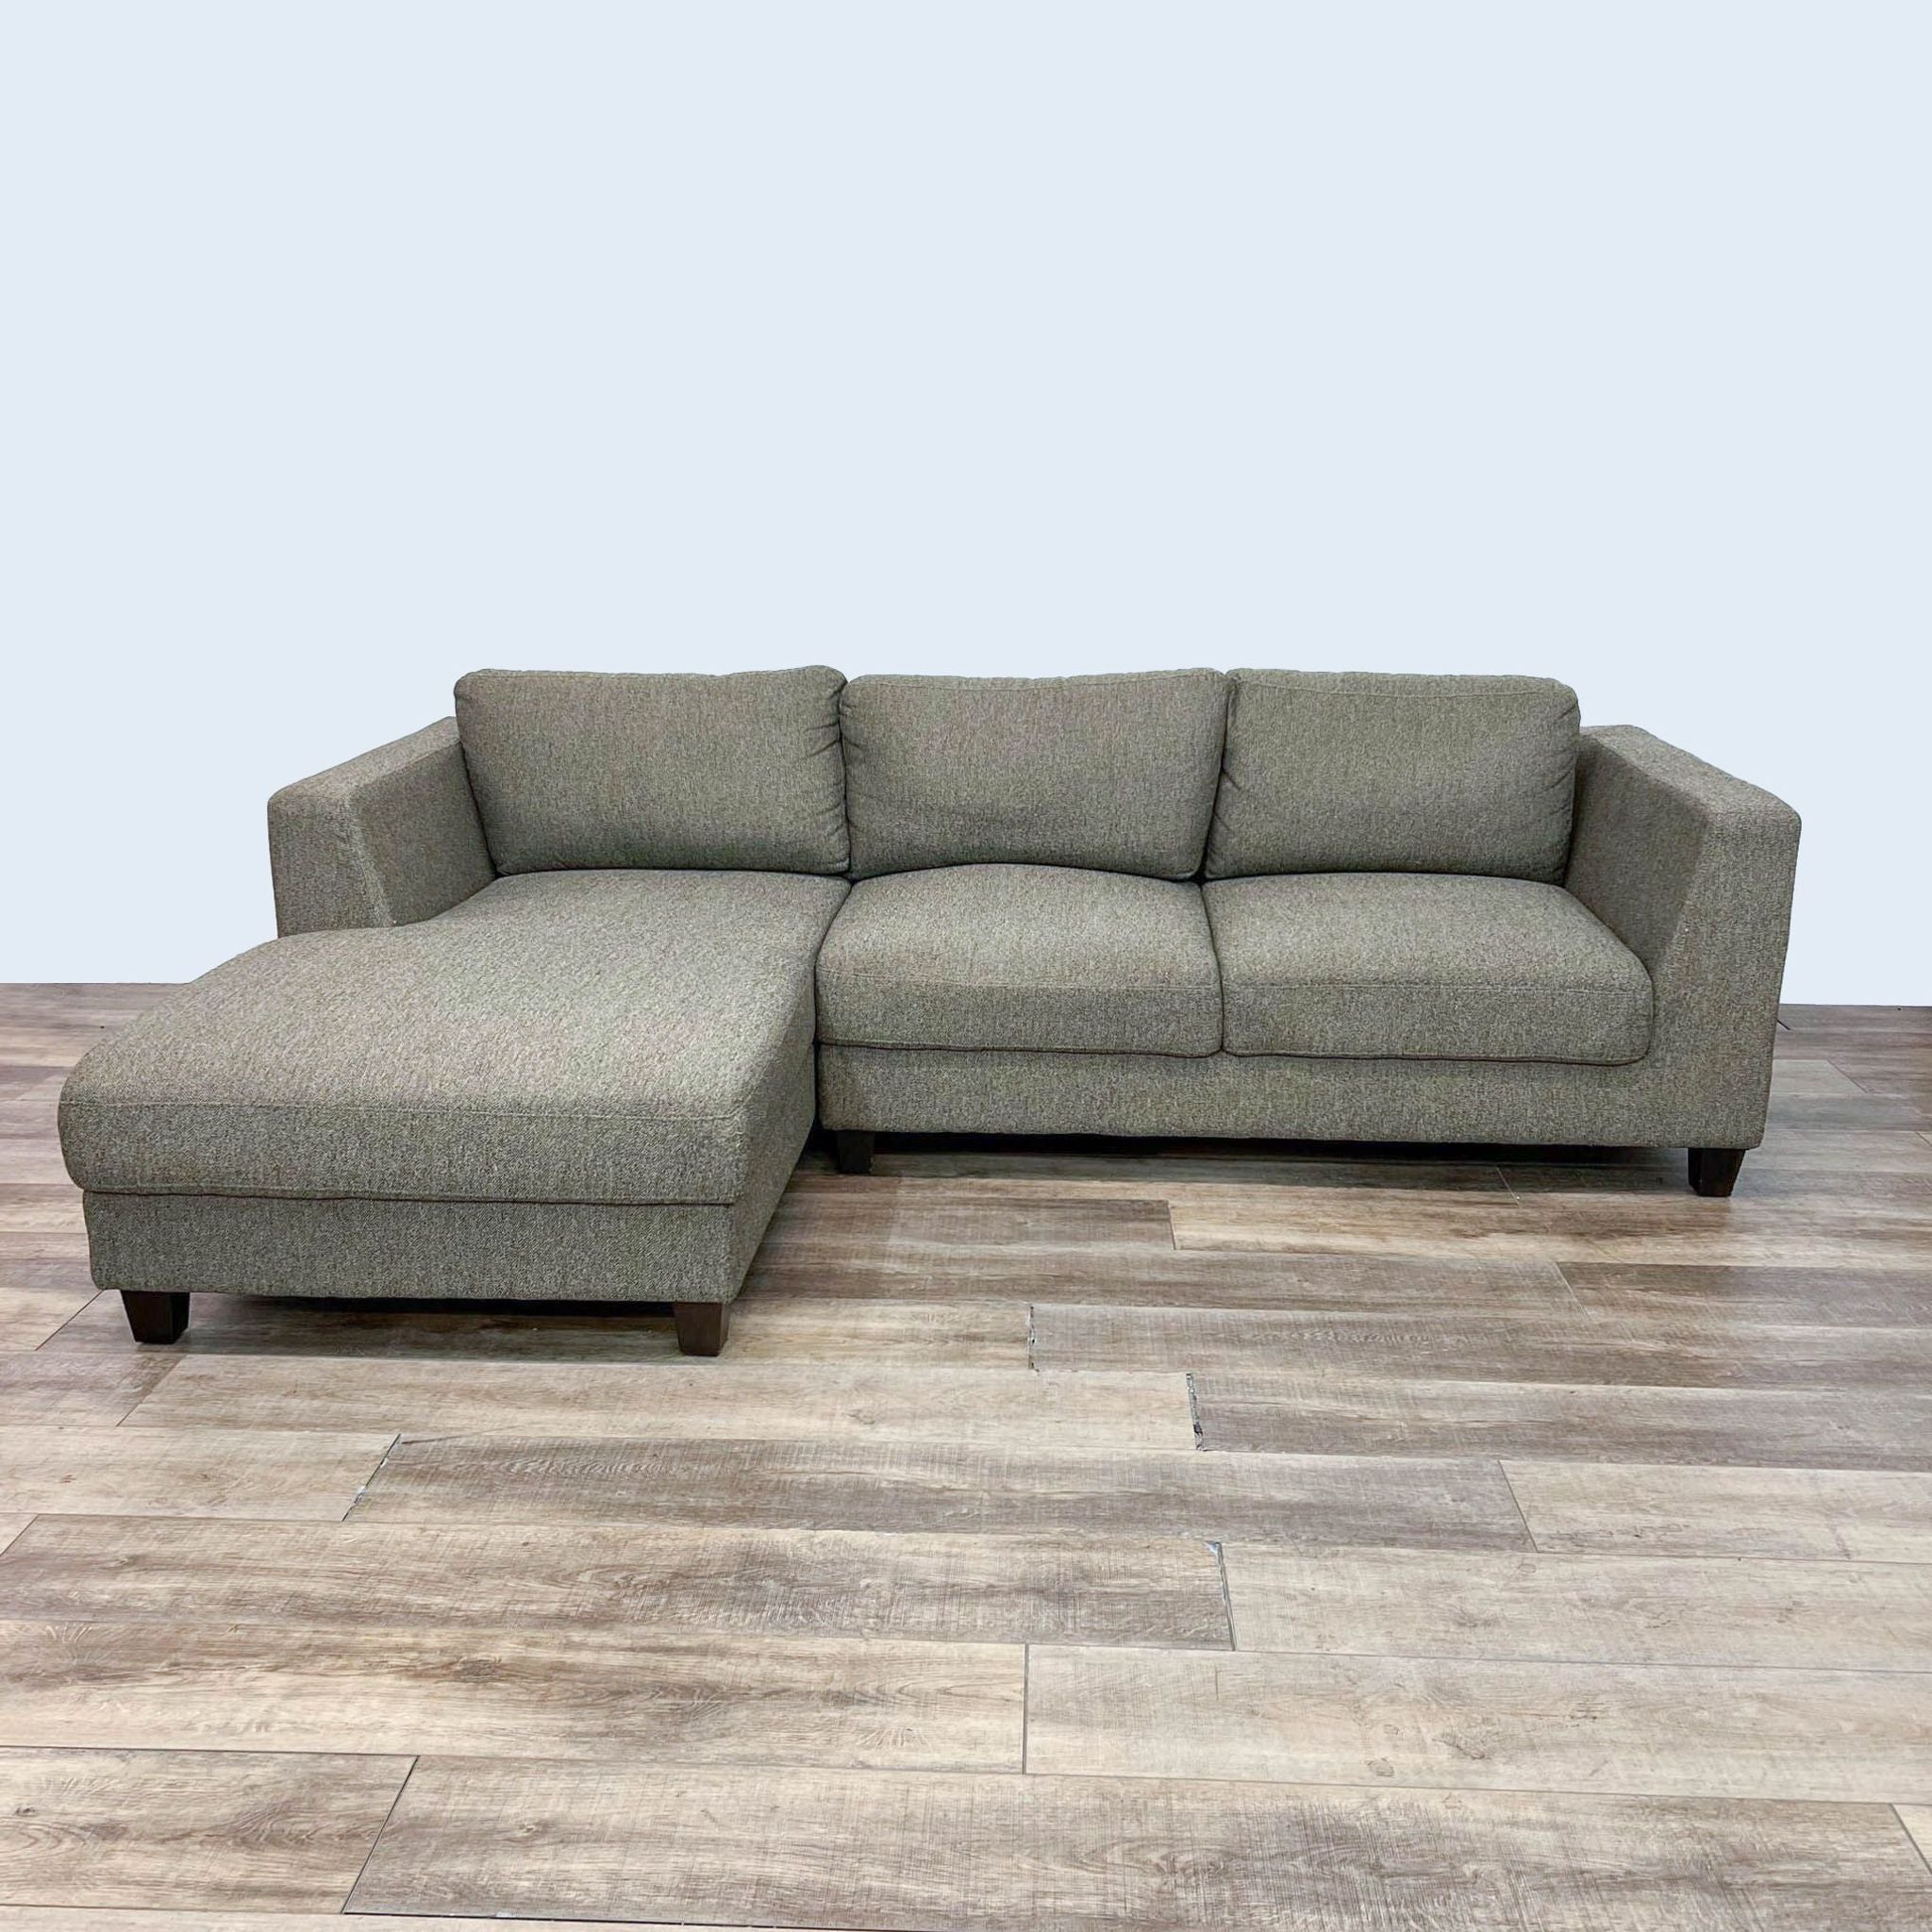 Modern Reperch clean-lined sectional sofa with chaise and dark wooden legs, arranged on a wooden floor.